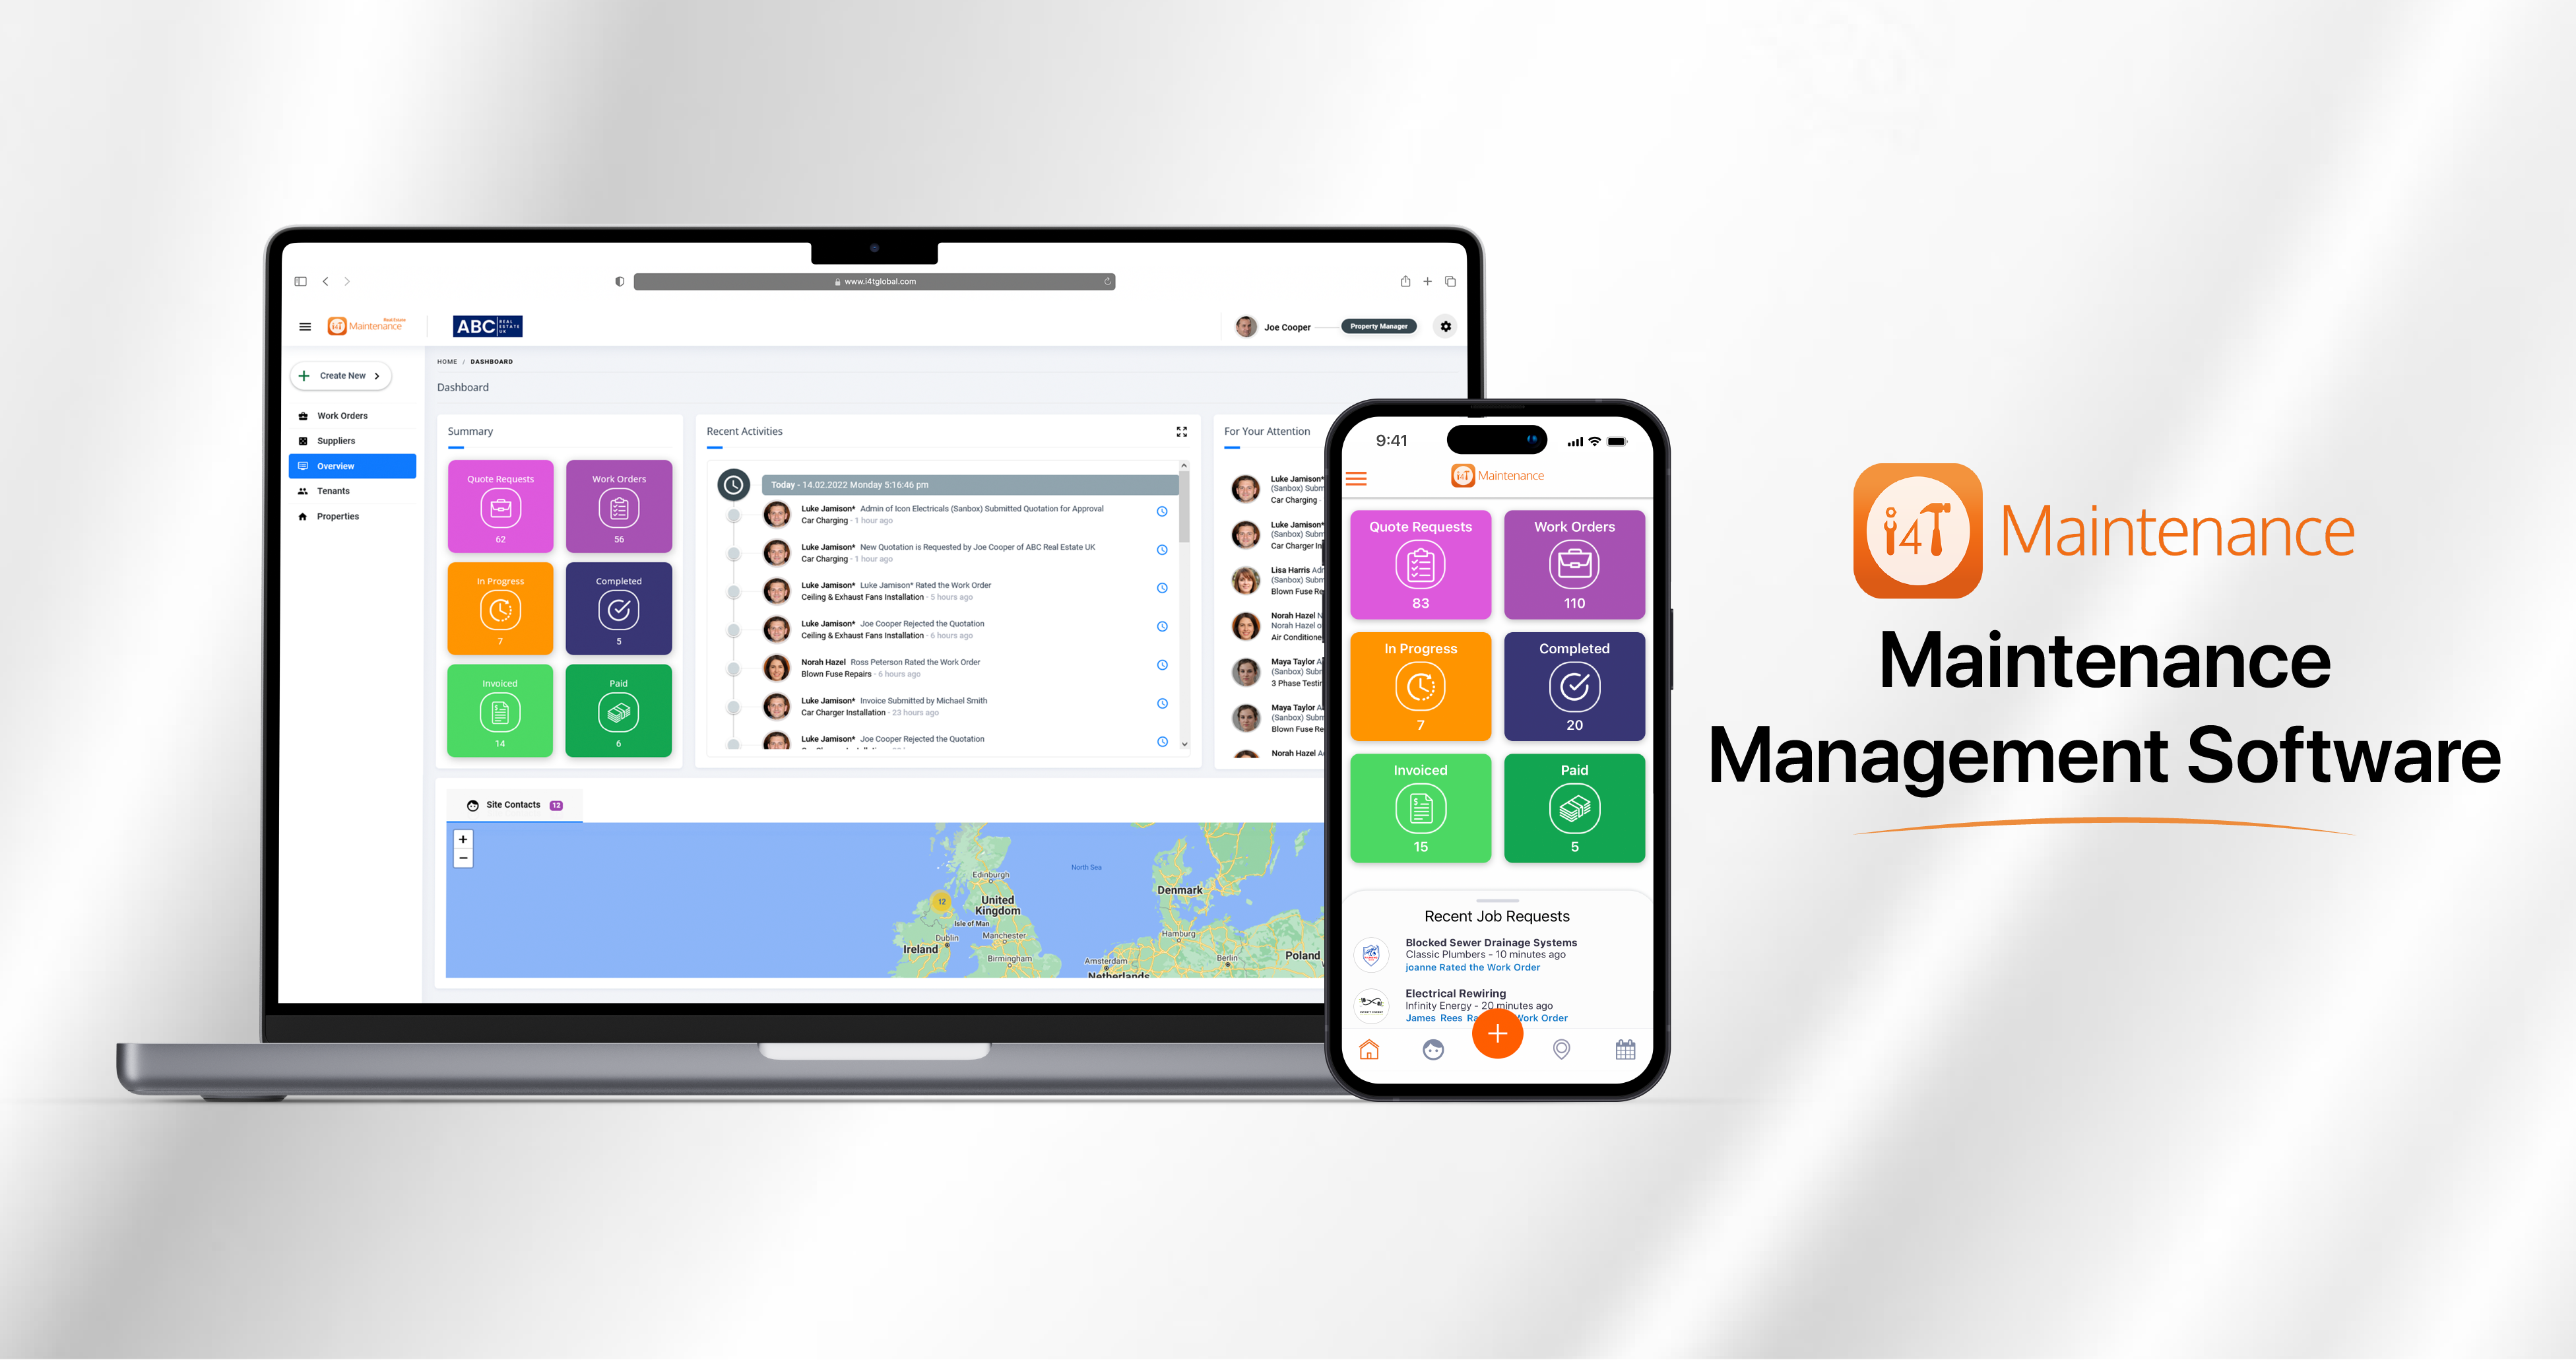 i4T Maintenance is an innovative, customisable software solution specifically designed to help property owners, real estate, and strata companies manage, monitor and control their property maintenance operations with transparency and compliance.